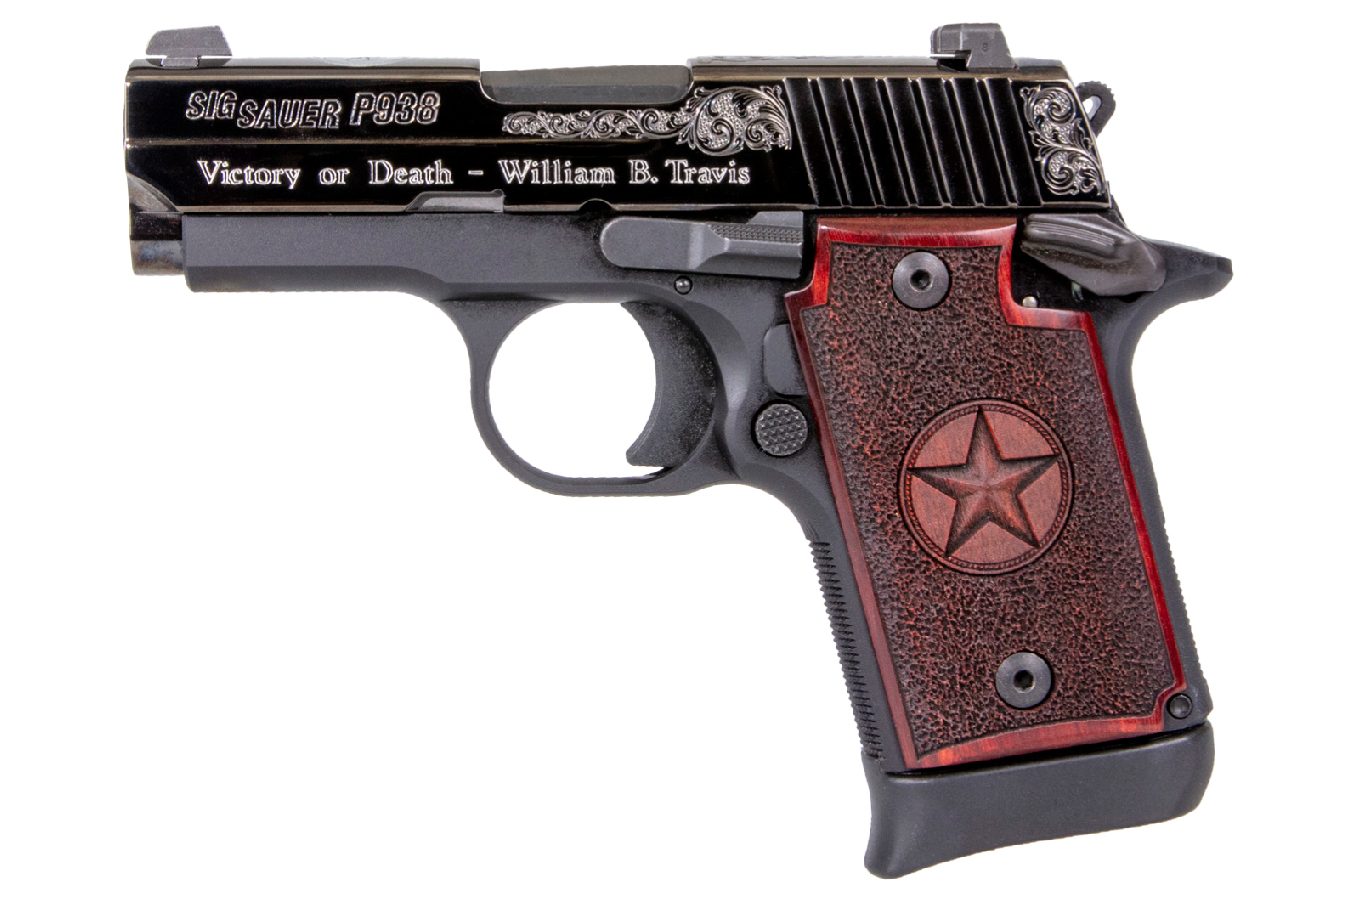 SIG SAUER P938 9MM TEXAS ENGRAVED SPECIAL EDITION PISTOL